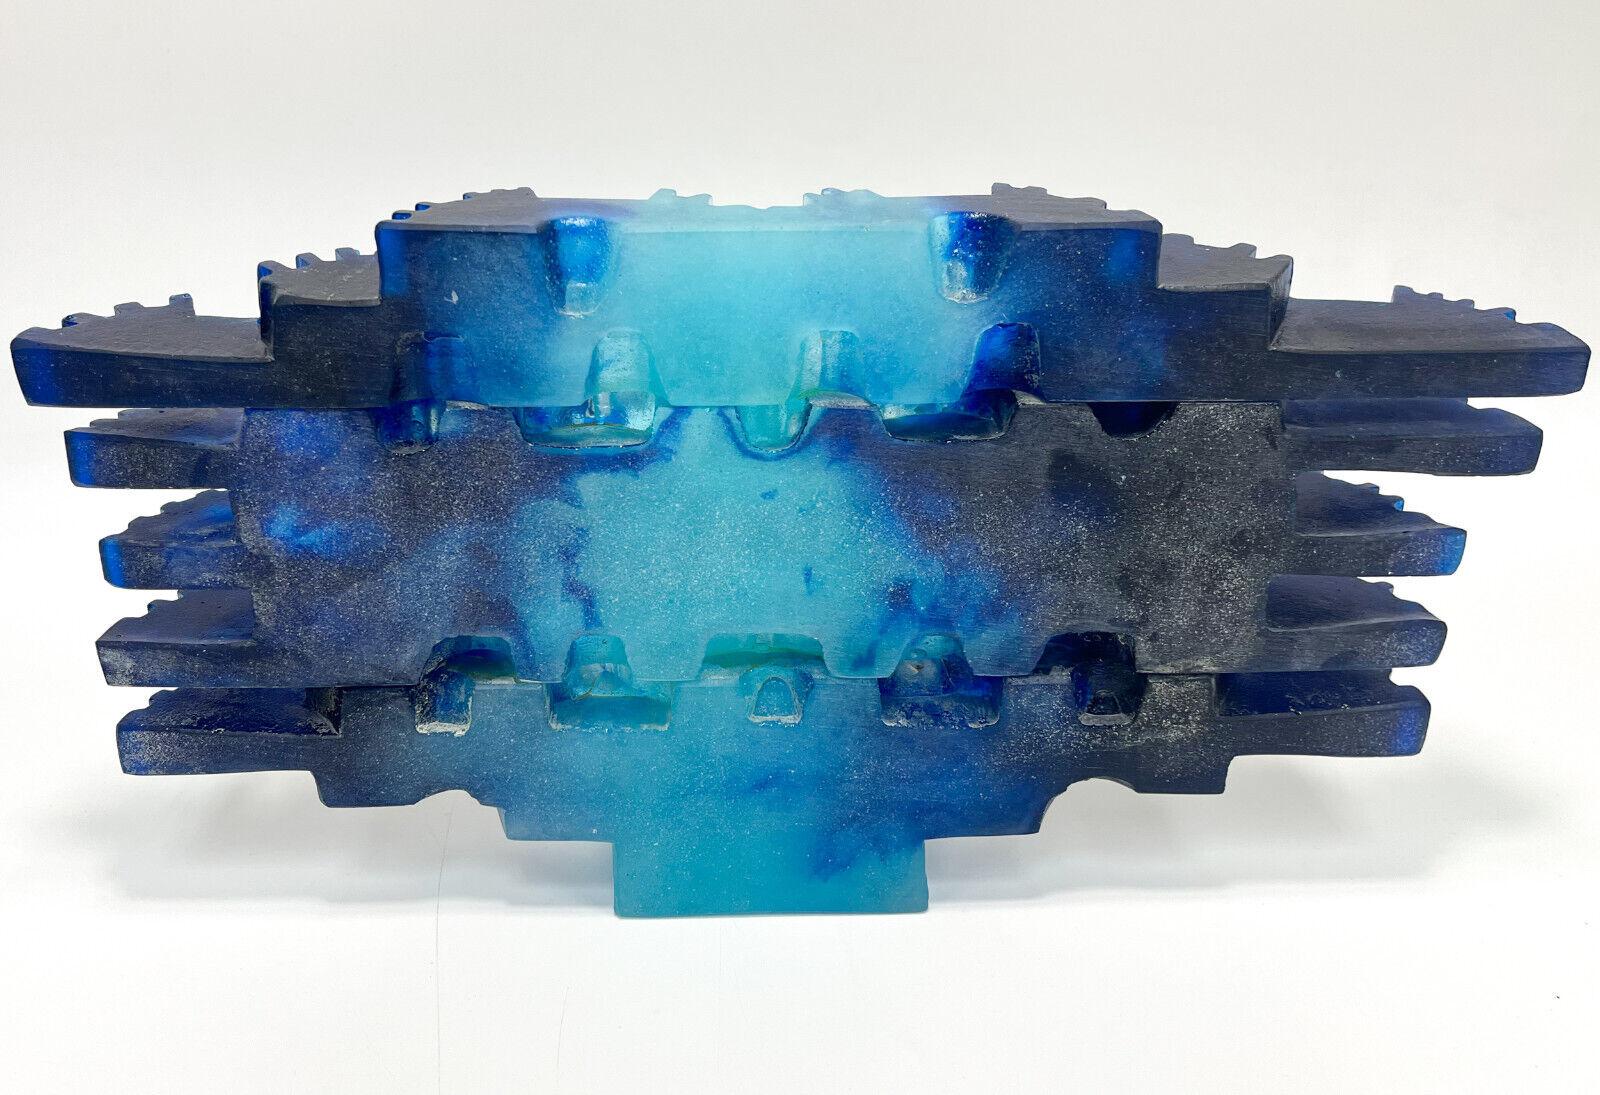 Daum Pate De Vere Abstract Sculpture by Mard De Rosny, Limited Edition of 200 For Sale 3